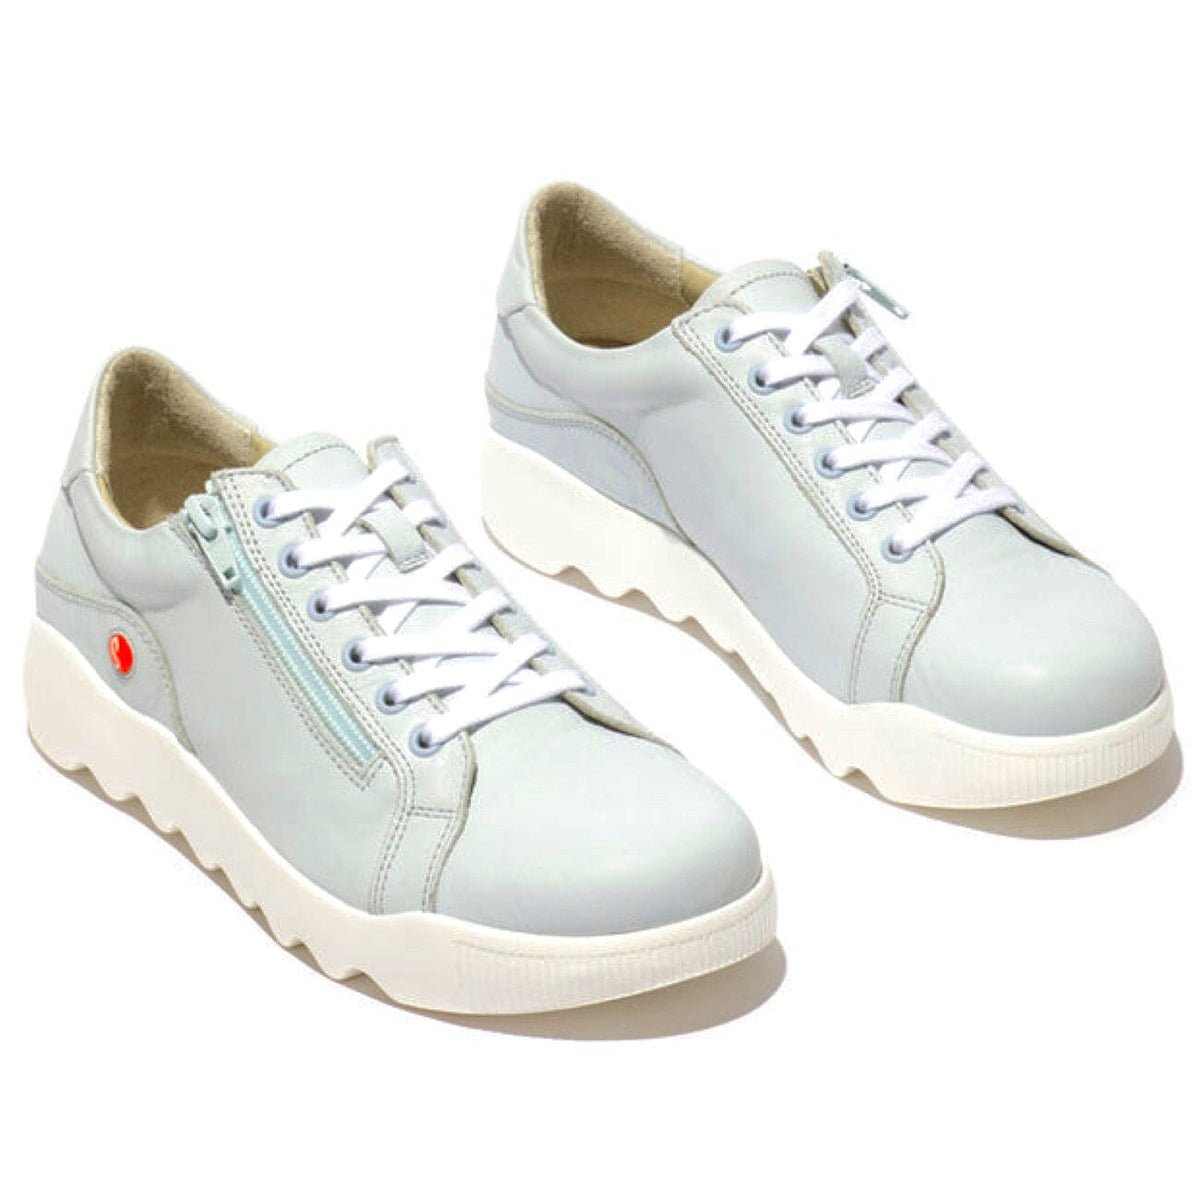 Softinos, Whiz719, Laceup Shoe, Smooth Leather, Light Blue Shoes Softinos Light Blue 36 